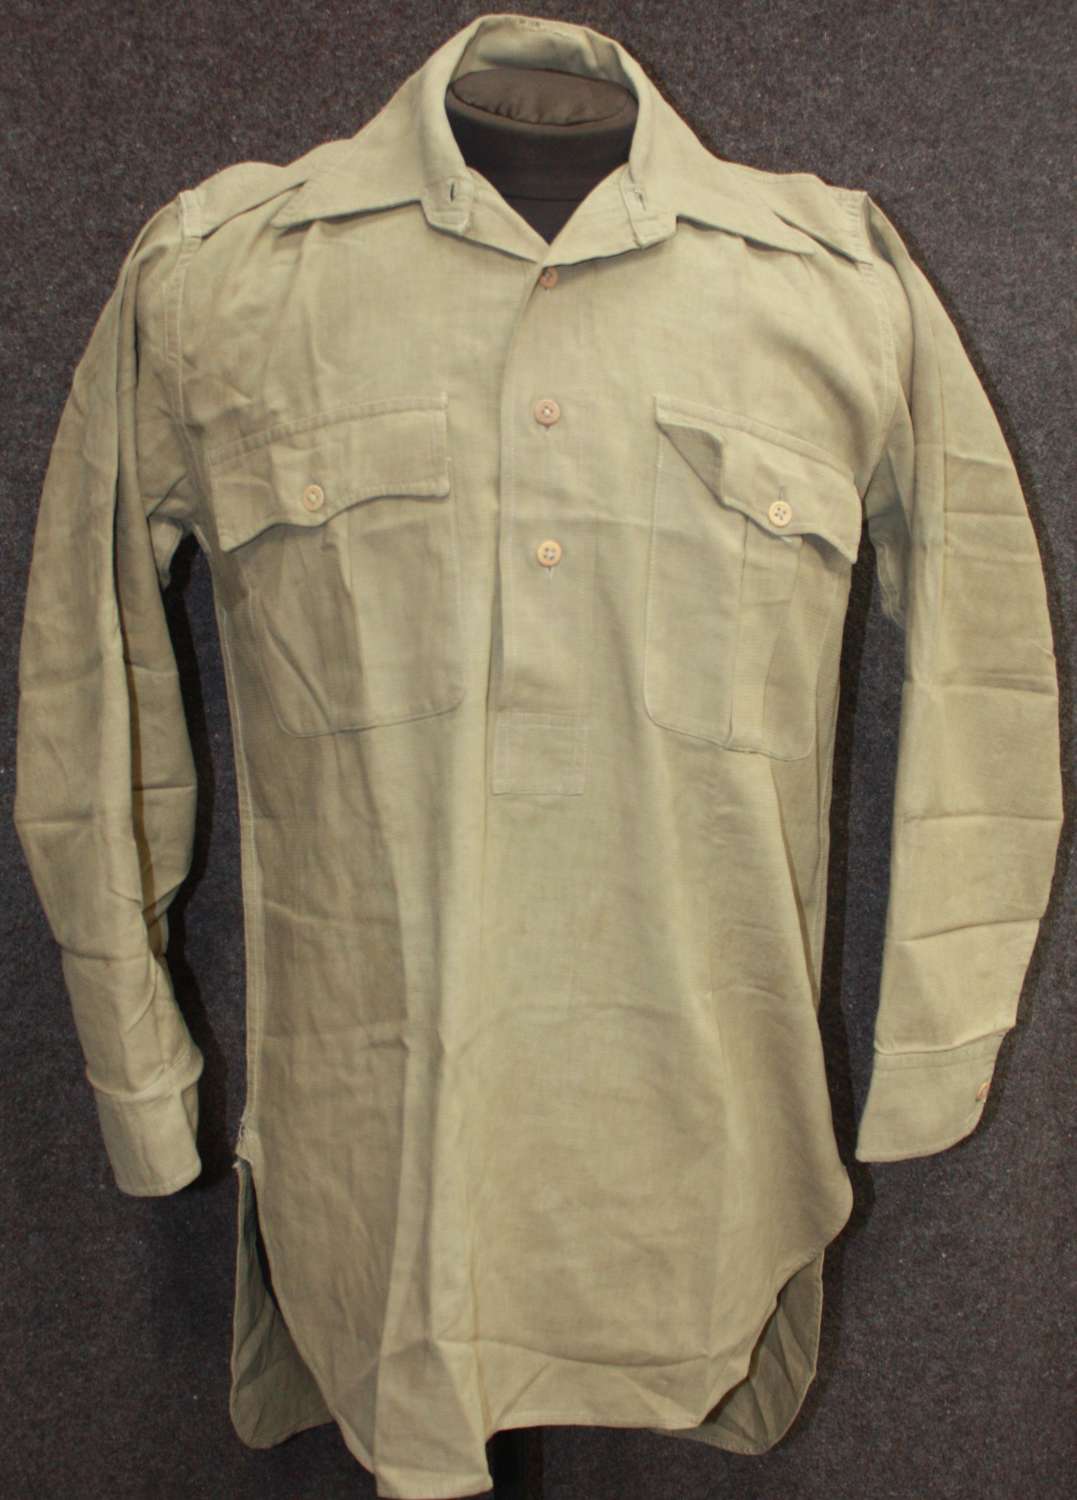 A WWII PERIOD KD SHIRT 4 BUTTON HALF FRONTED